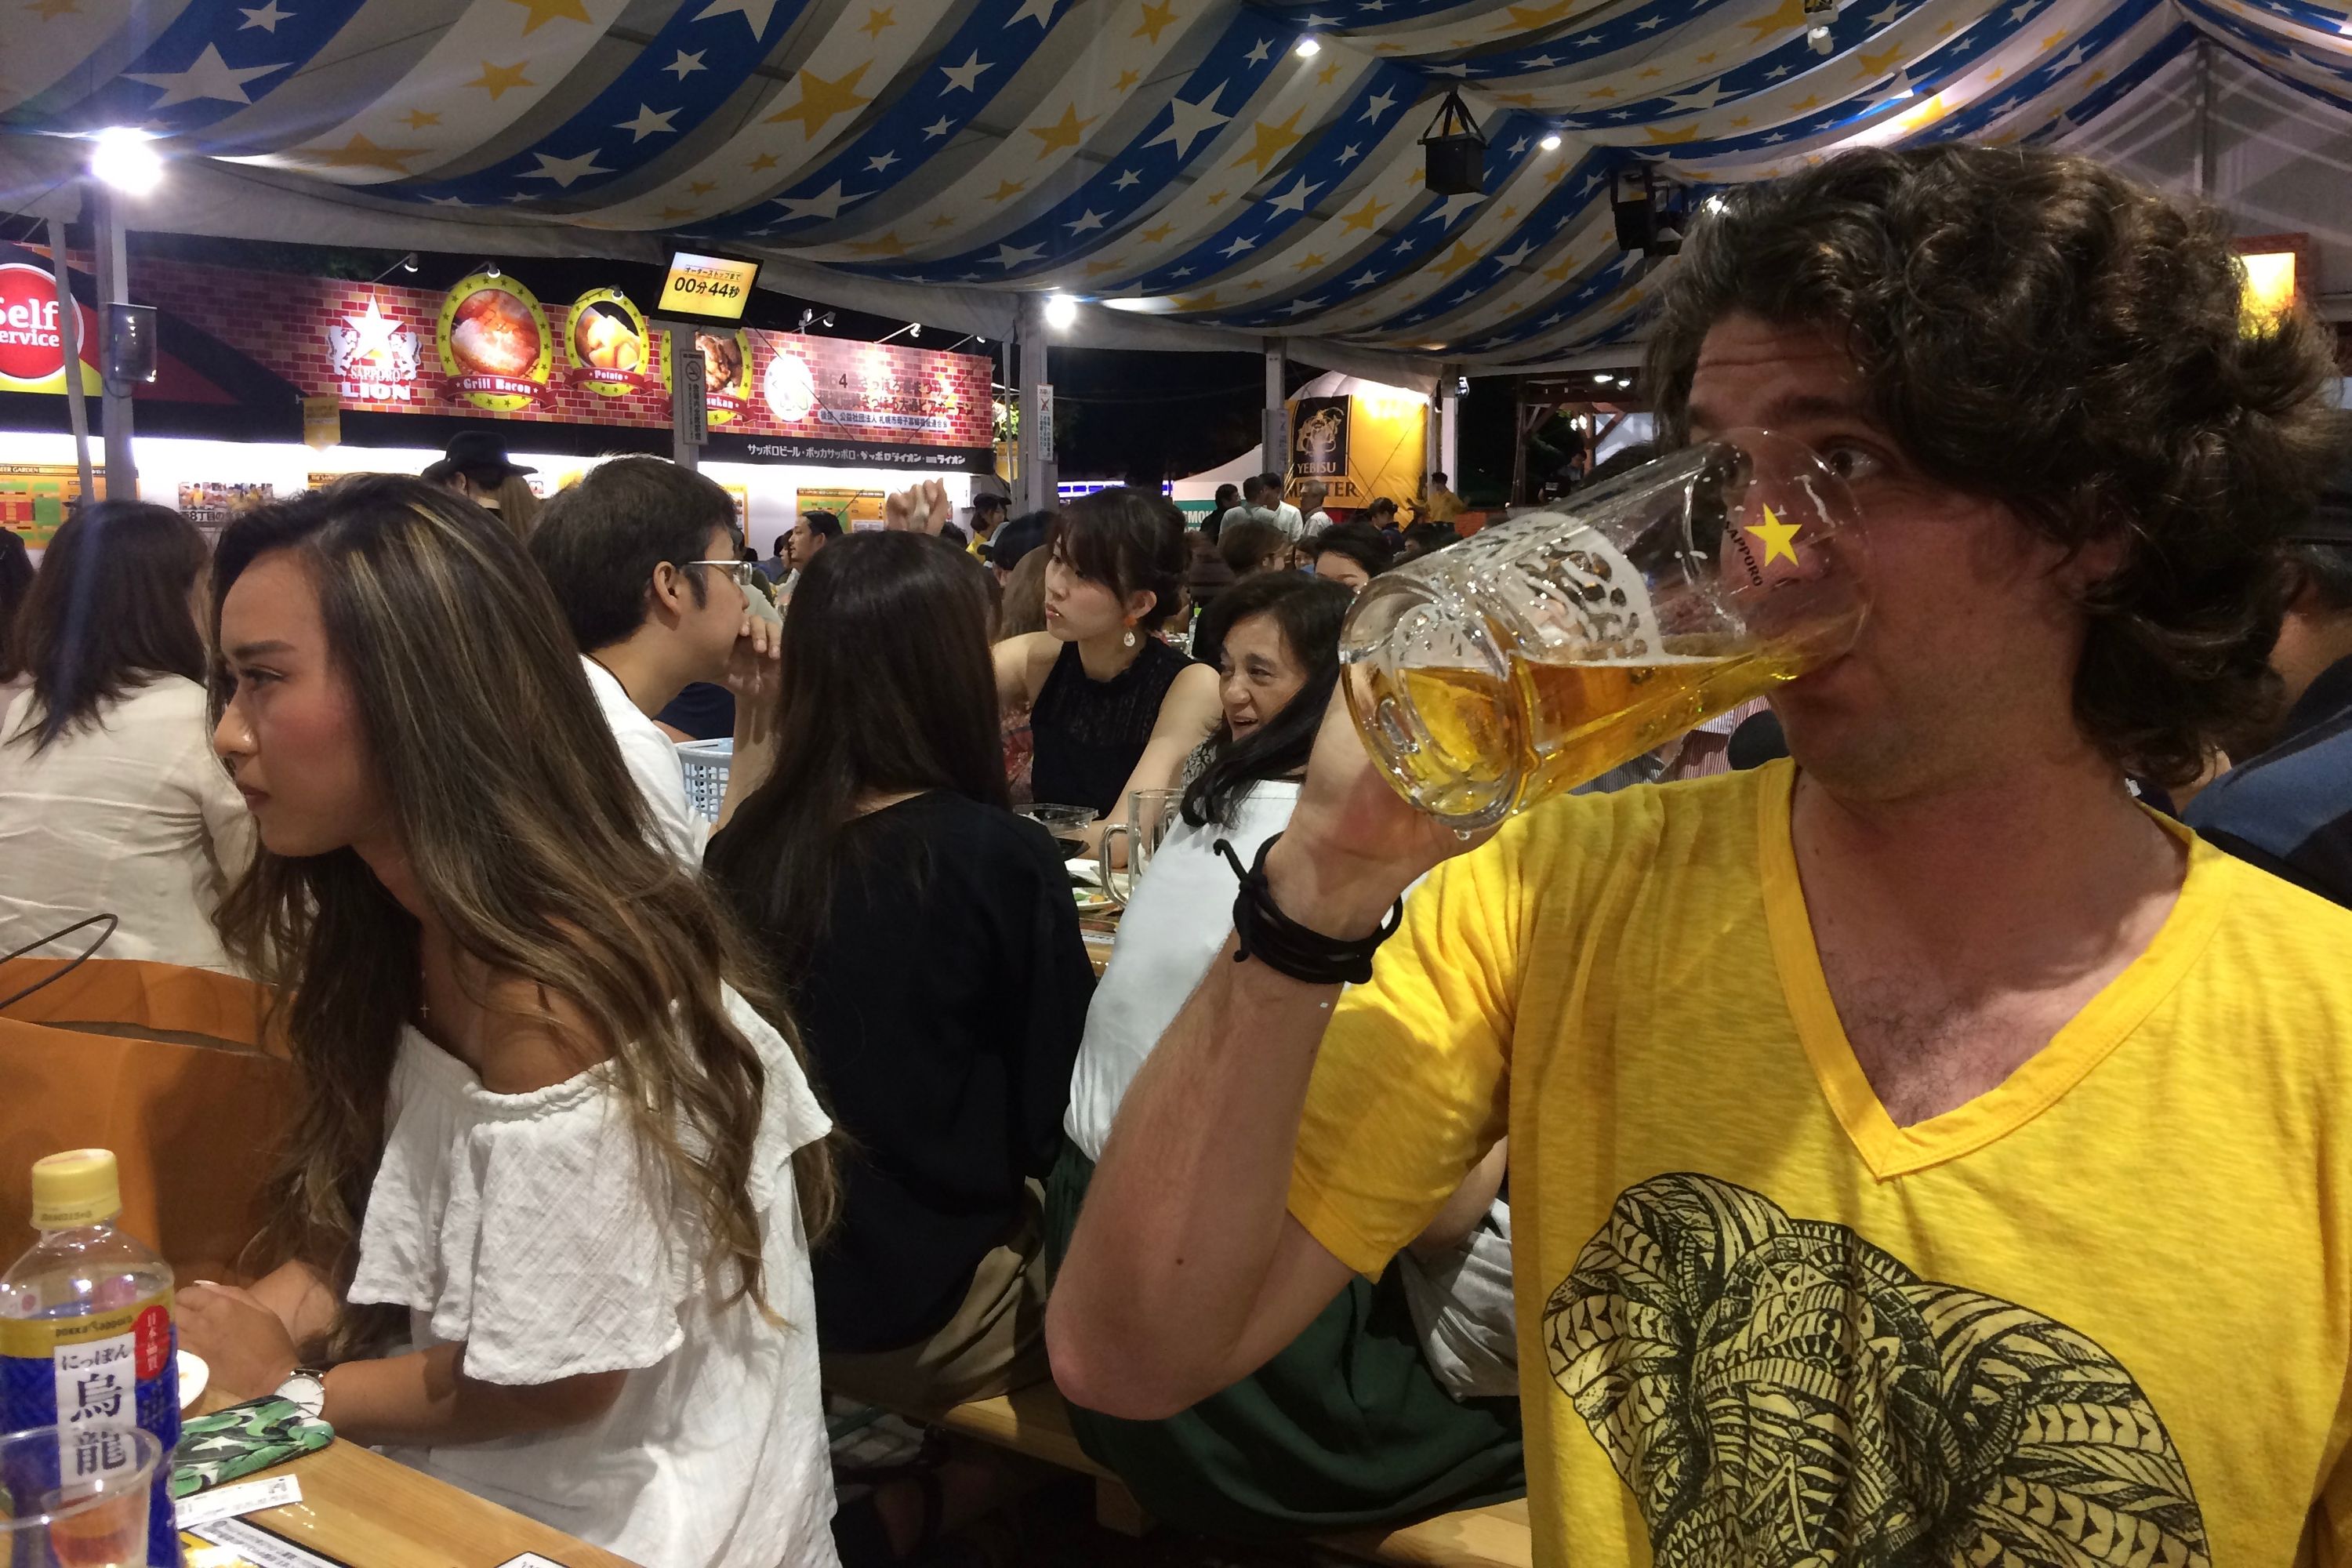 Gabor drinks beer from a very large mug, sitting next to a Japanese woman in a white shirt.